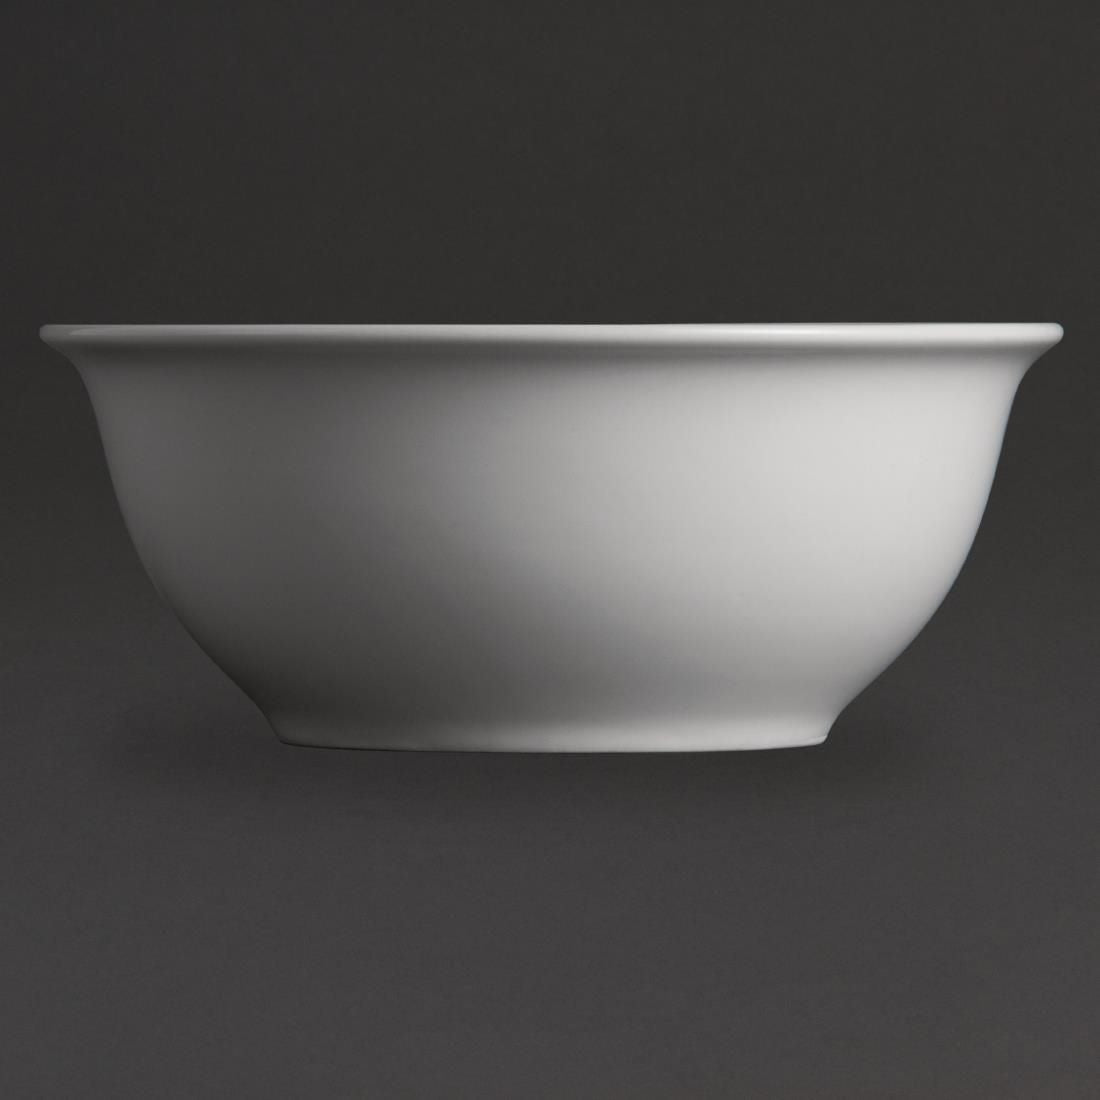 W408 Olympia Whiteware Salad Bowls 175mm (Pack of 6)